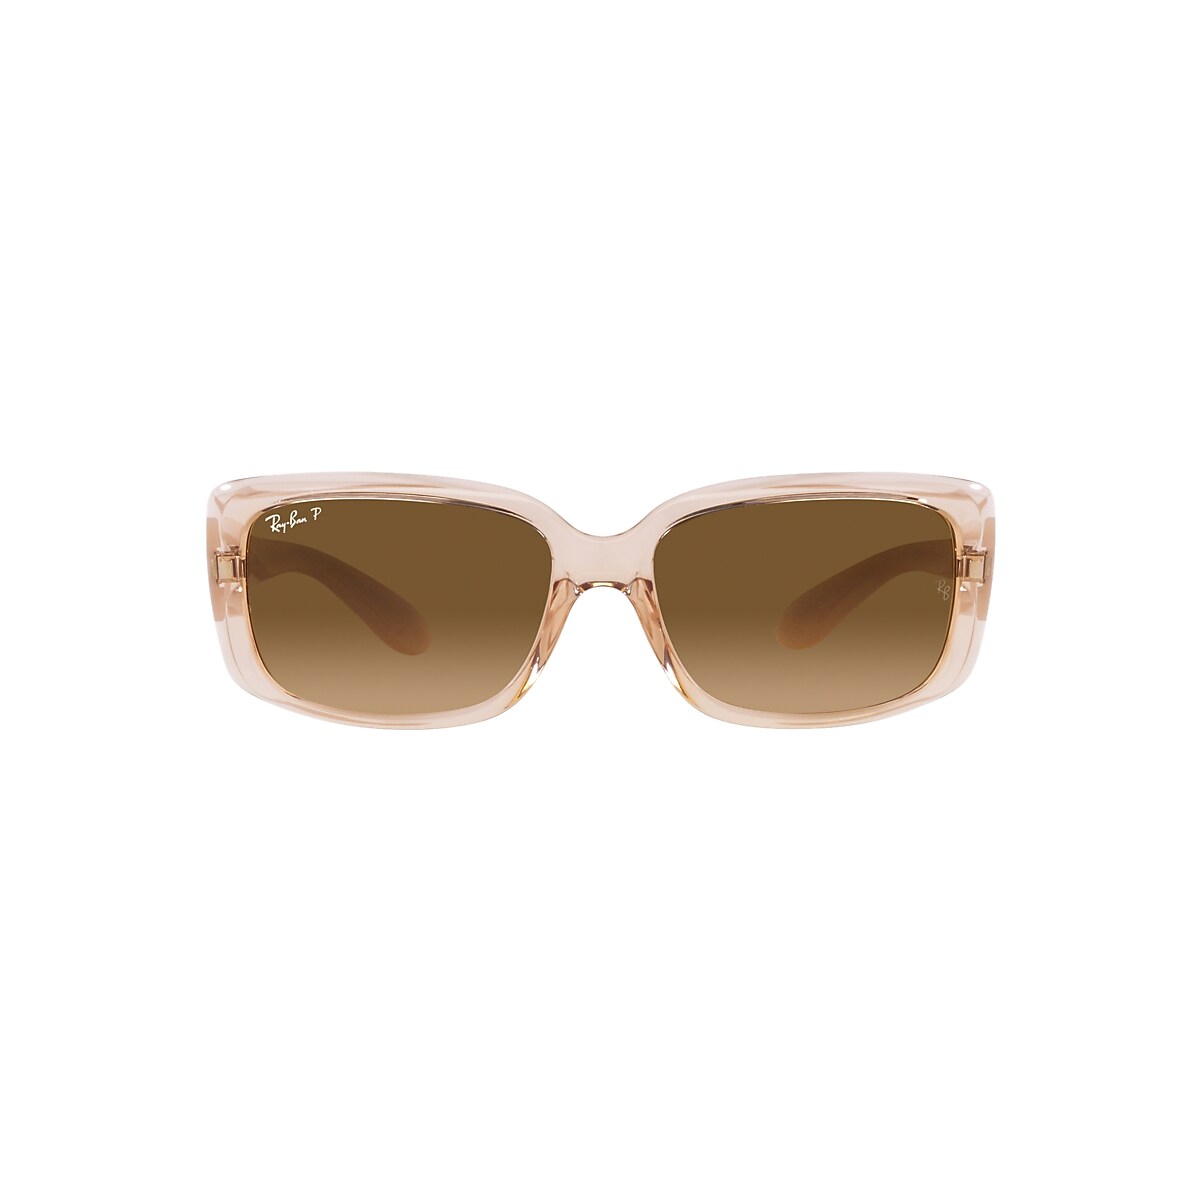 Mojave Mist Round Sunglasses- Tan Frame with Amber Lens Polarized